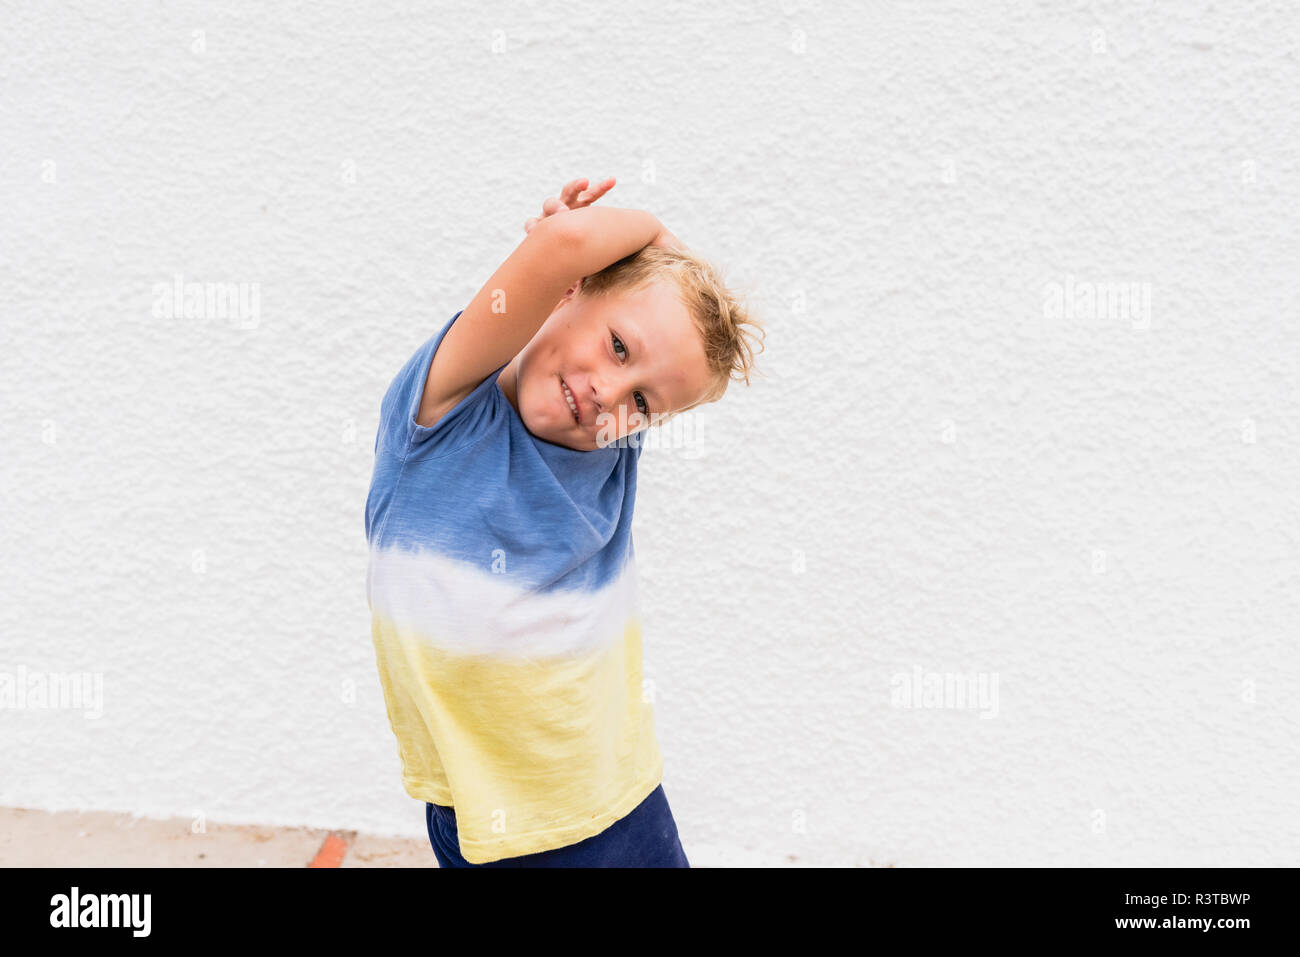 Blond boy making funny faces on white background. Stock Photo